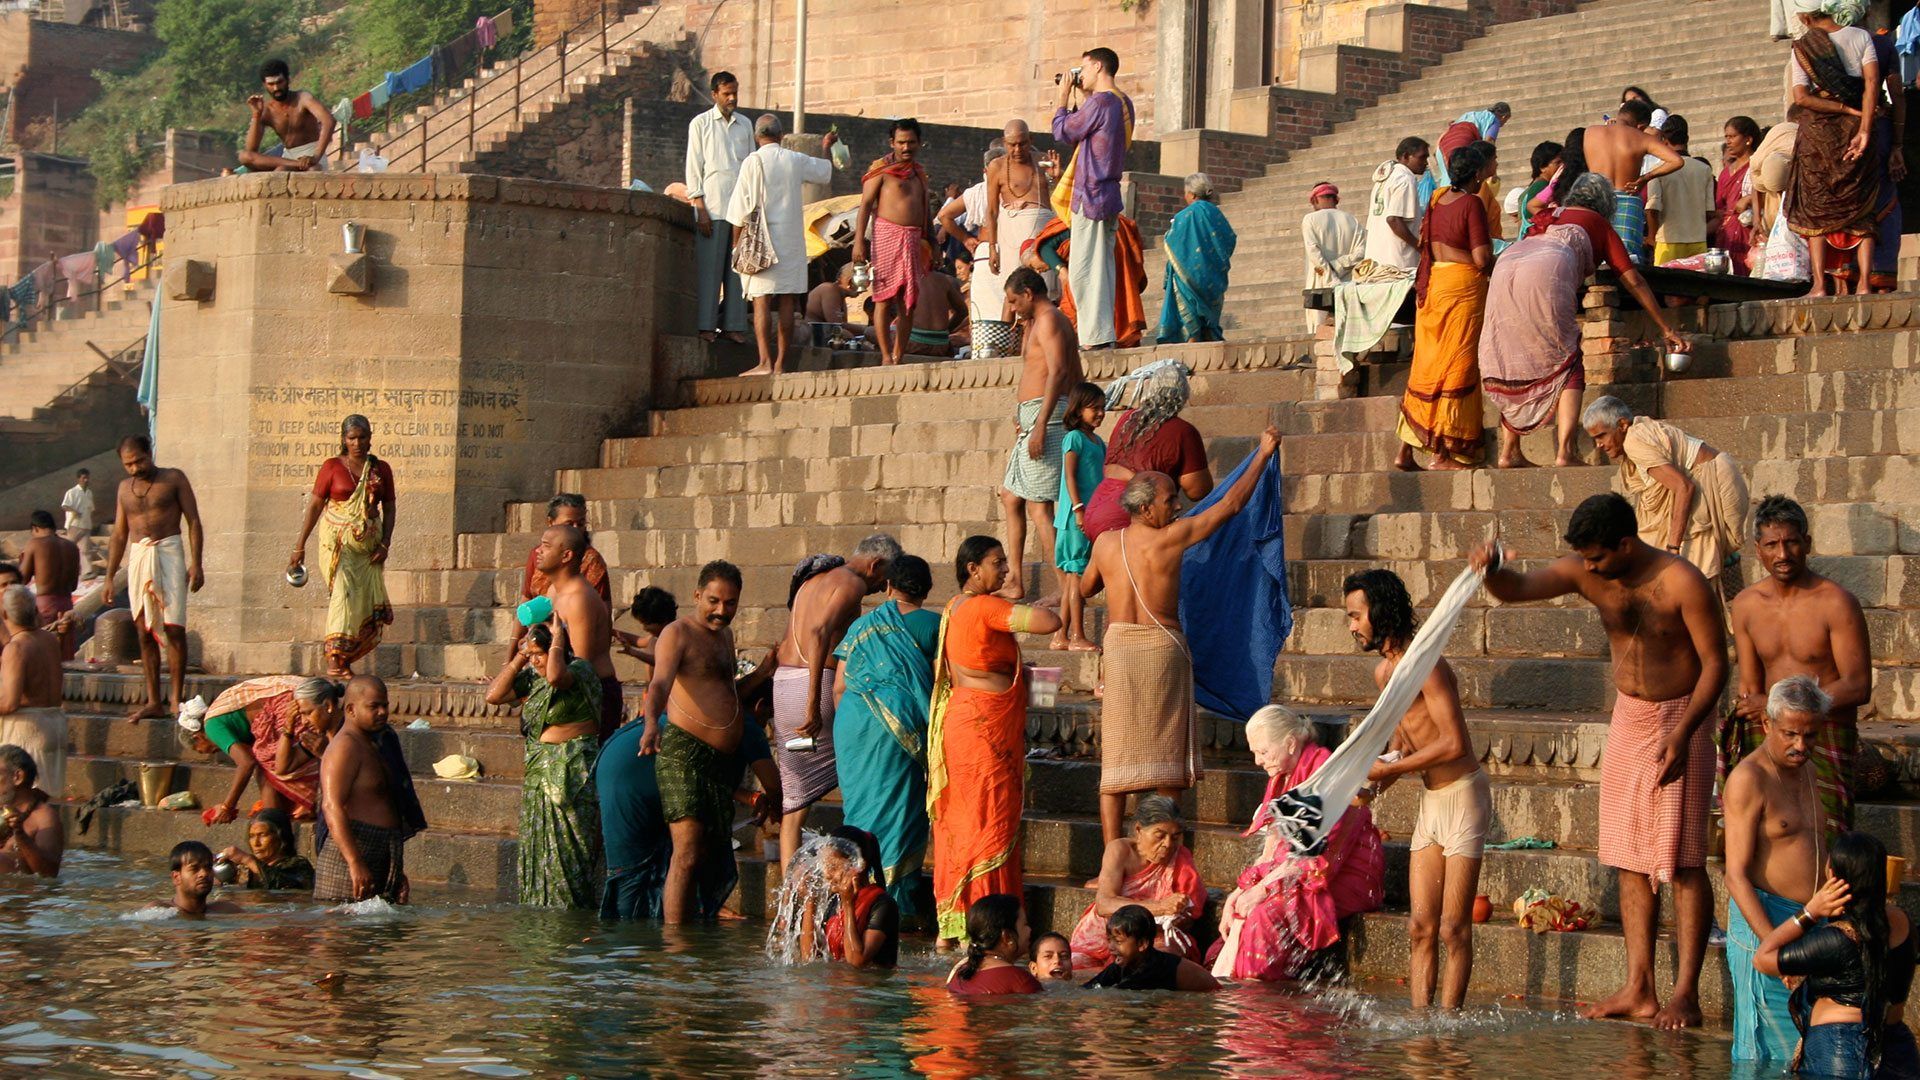 The holy Ganges